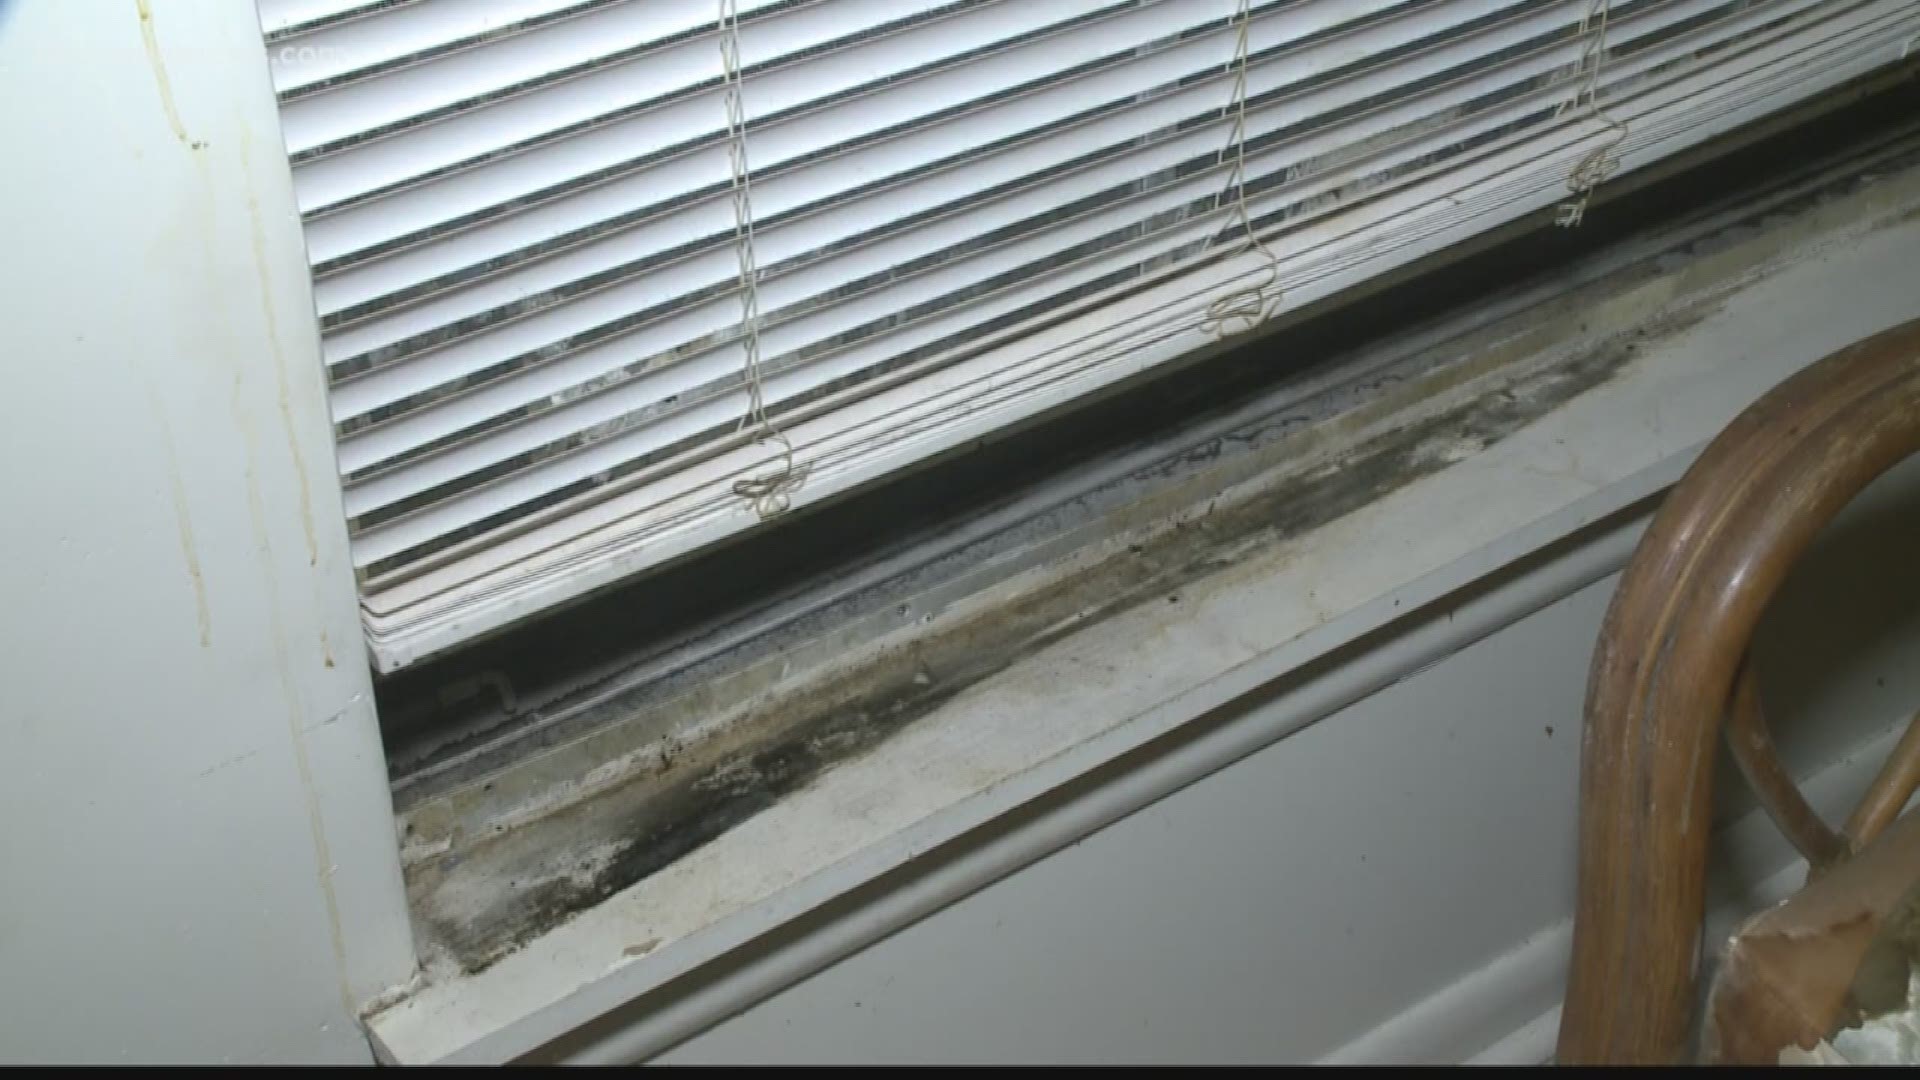 A resident is concerned for her health as her apartment continues to accumulate mold and roaches.